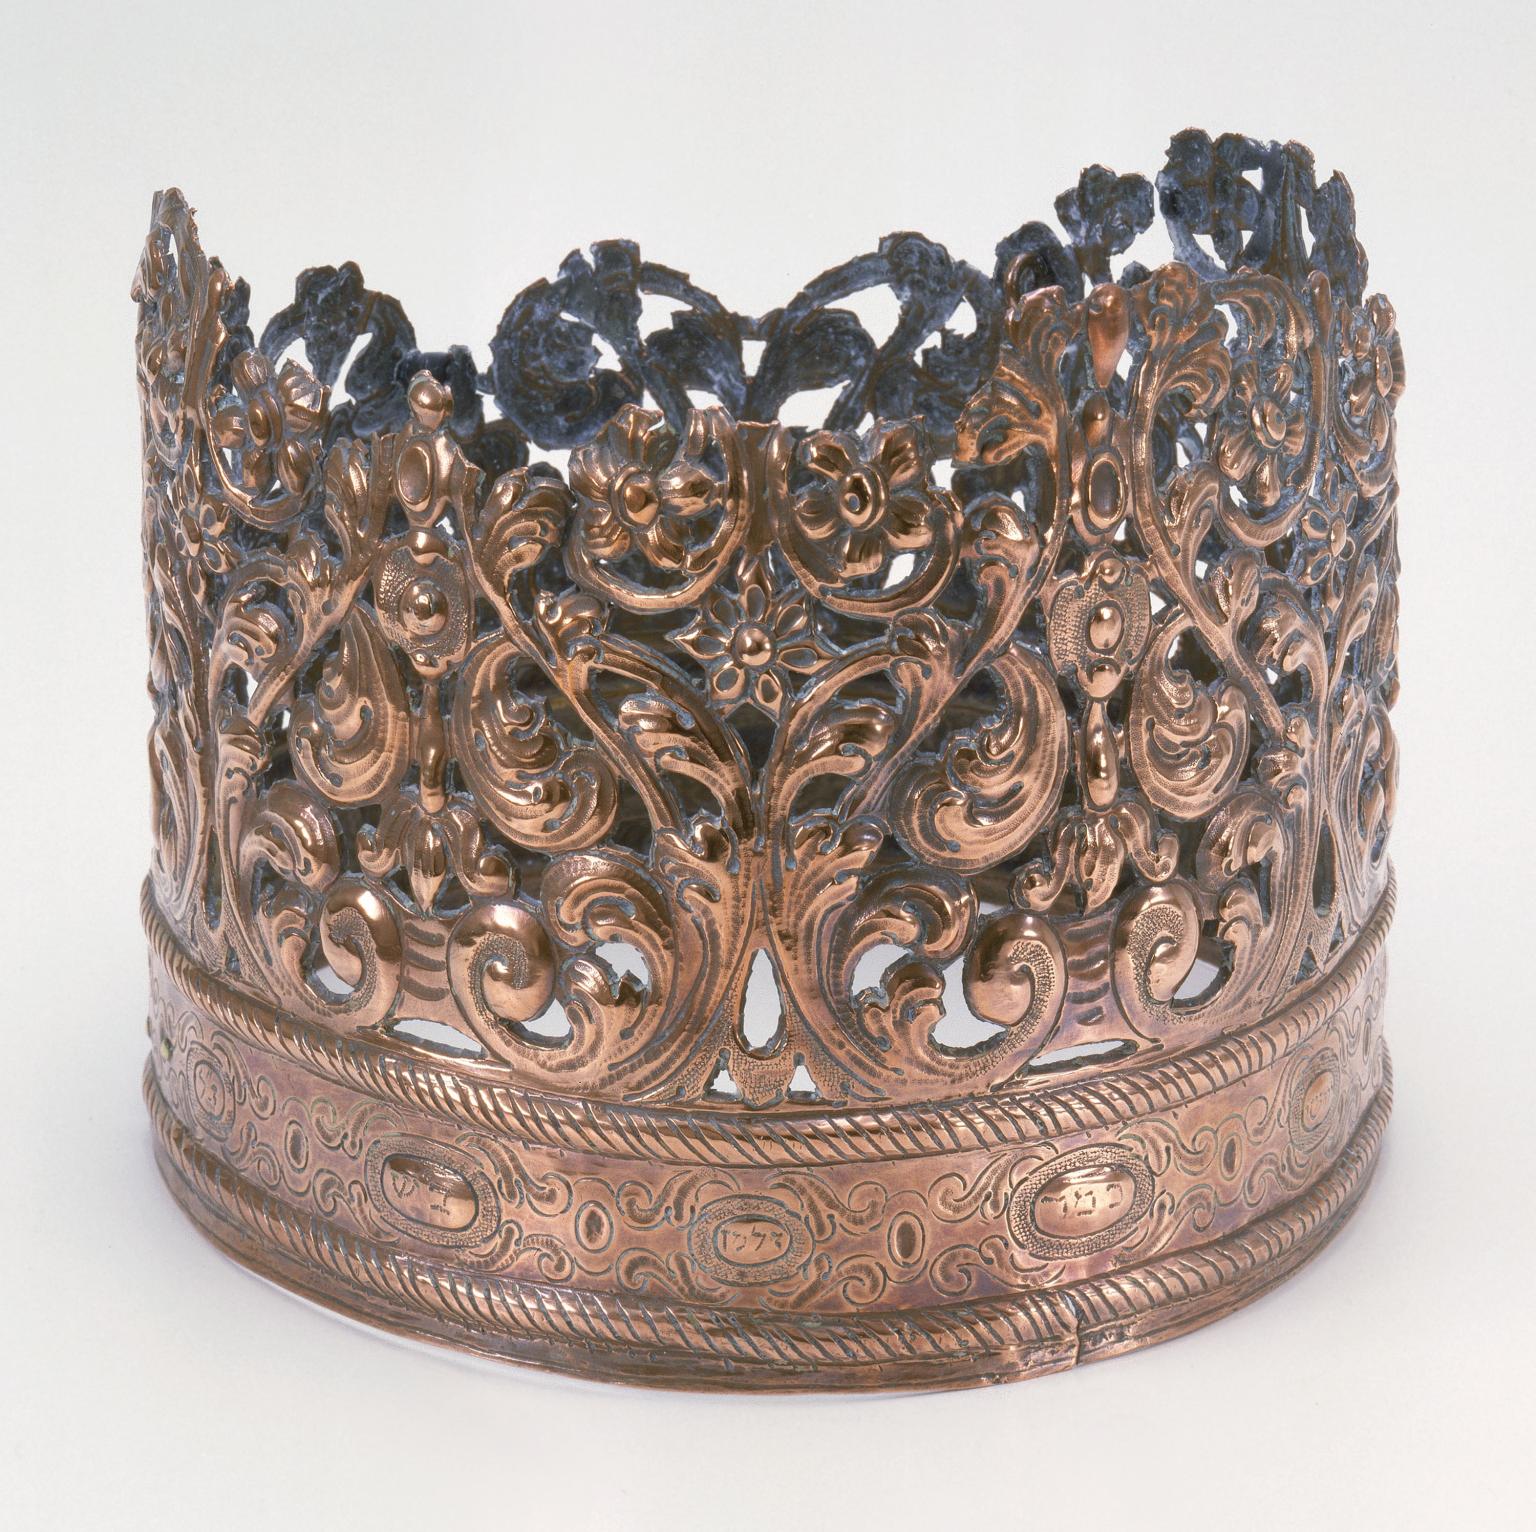 Crown with decoration above rim. 